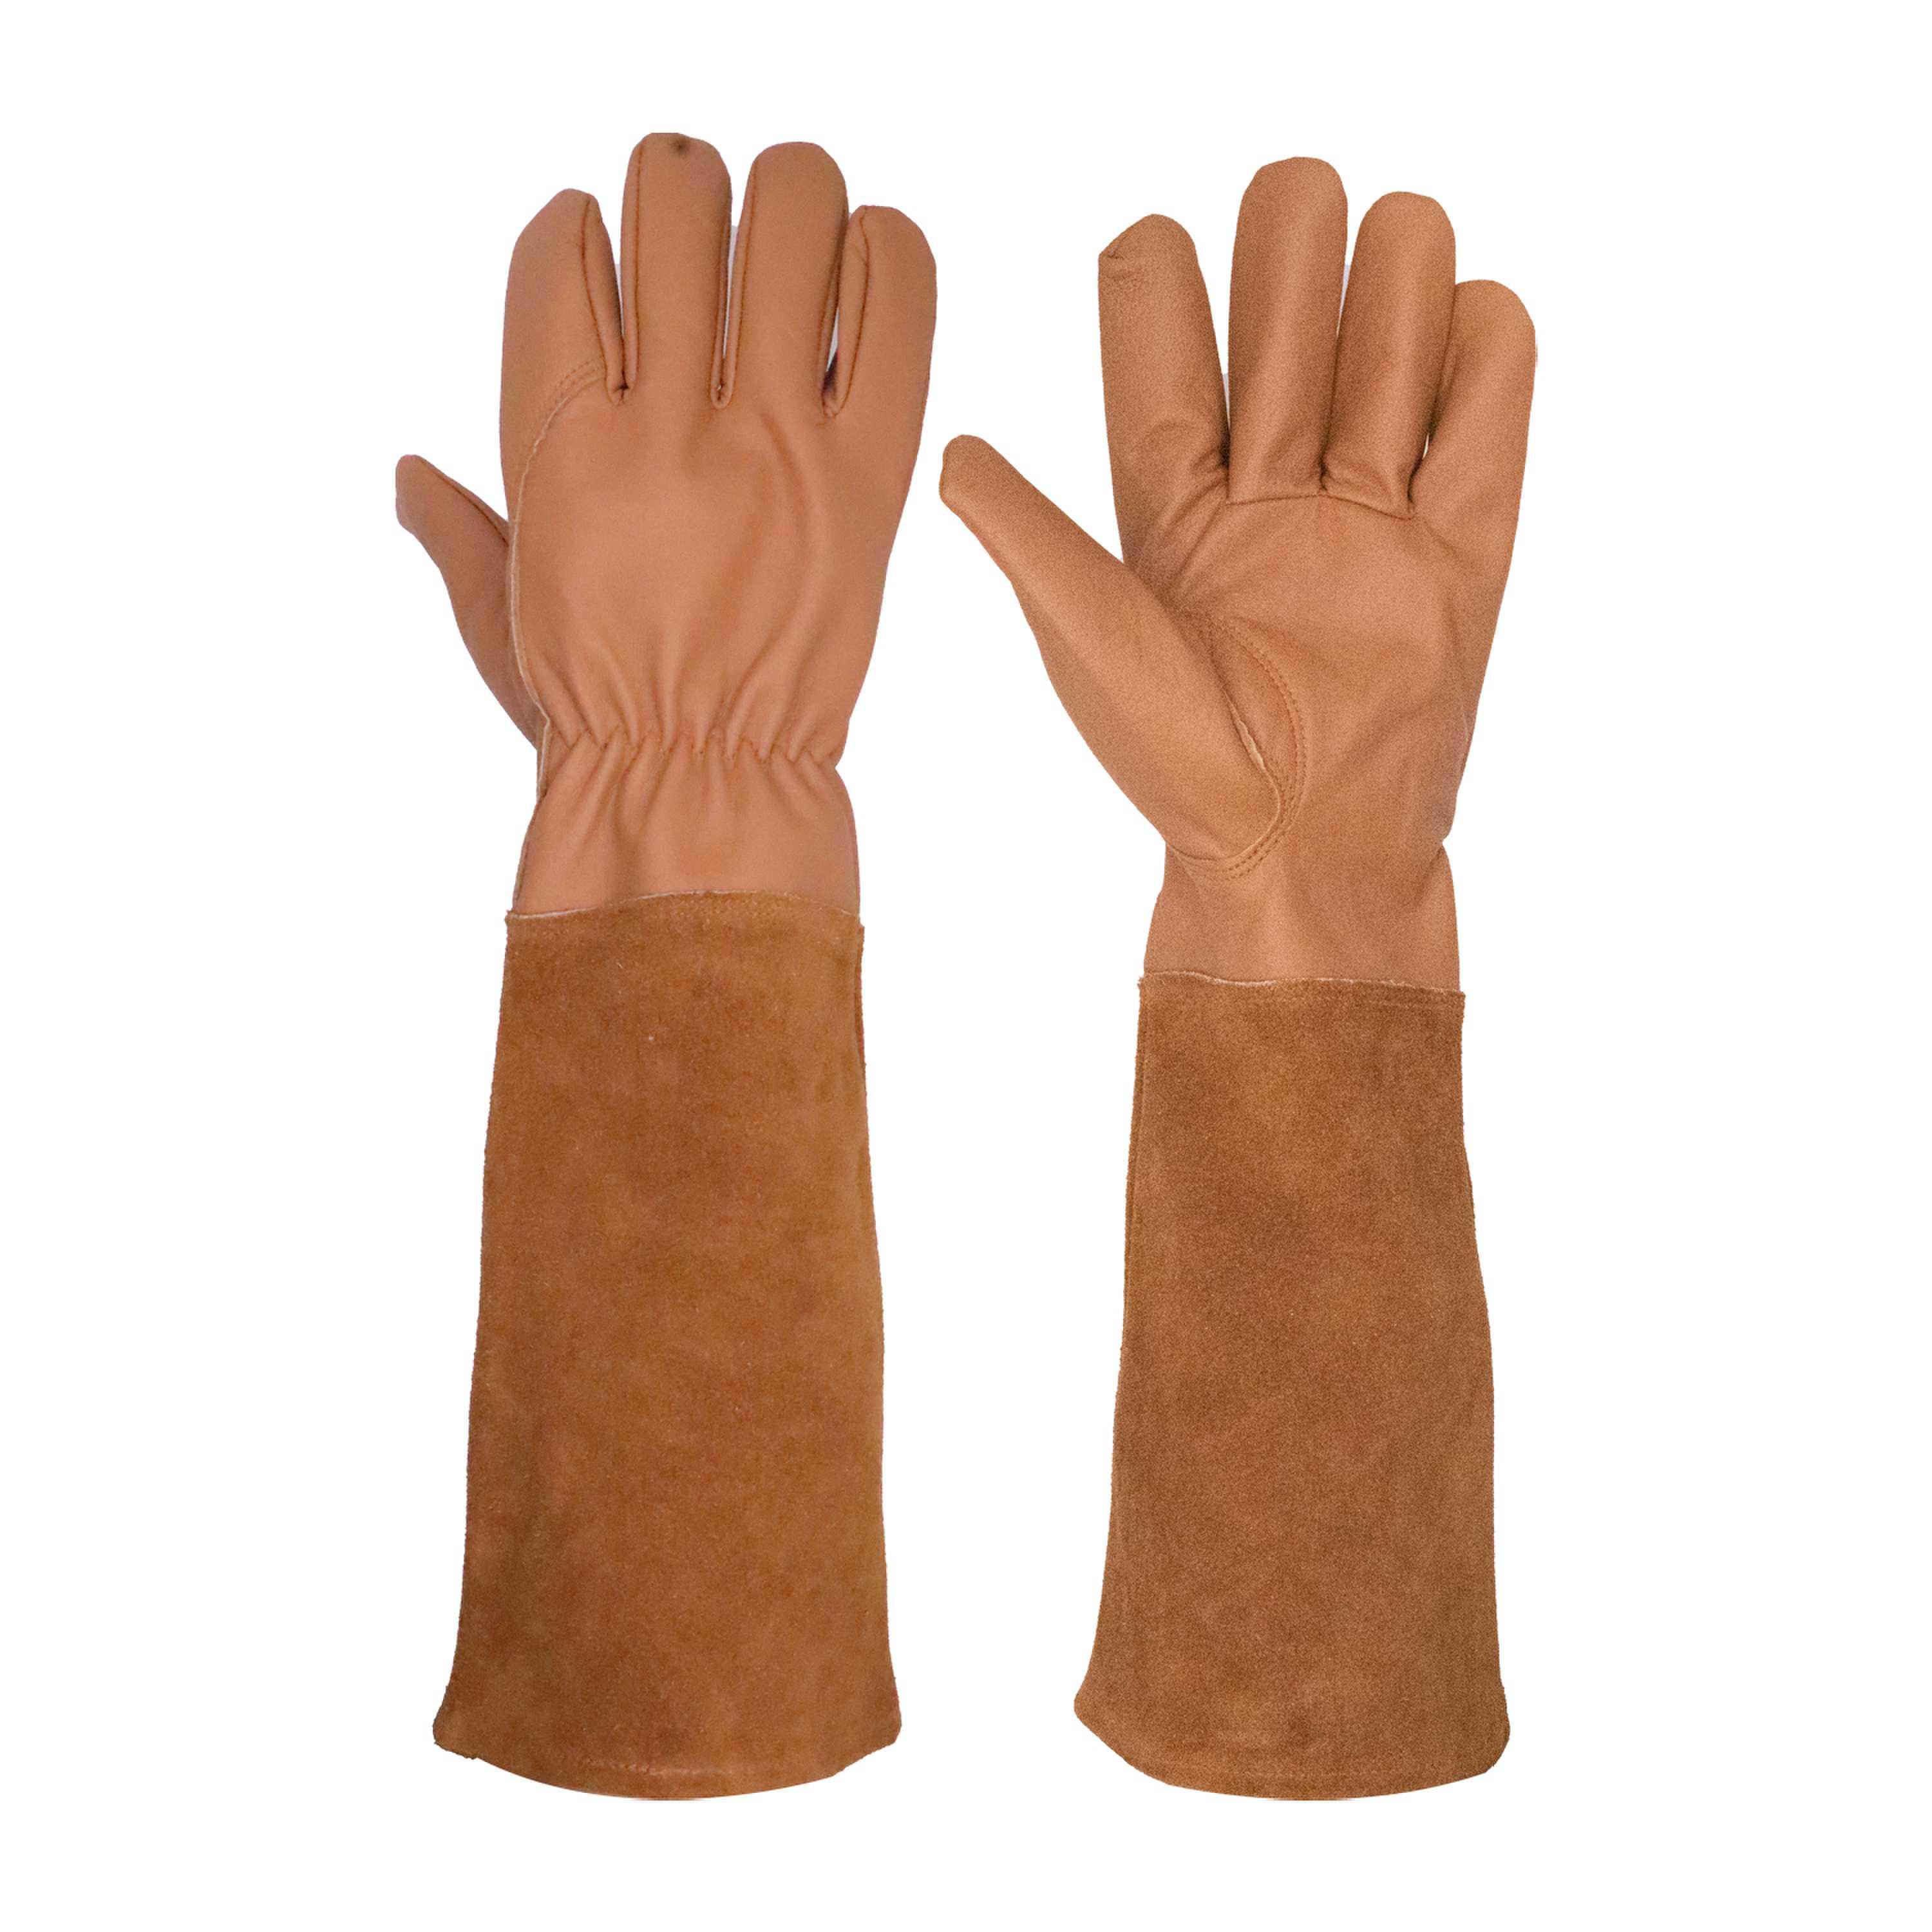 5146 PRISAFETY Thorn Proof Elbow Length Work Goatskin Leather Gardening Gloves for Winter Leather